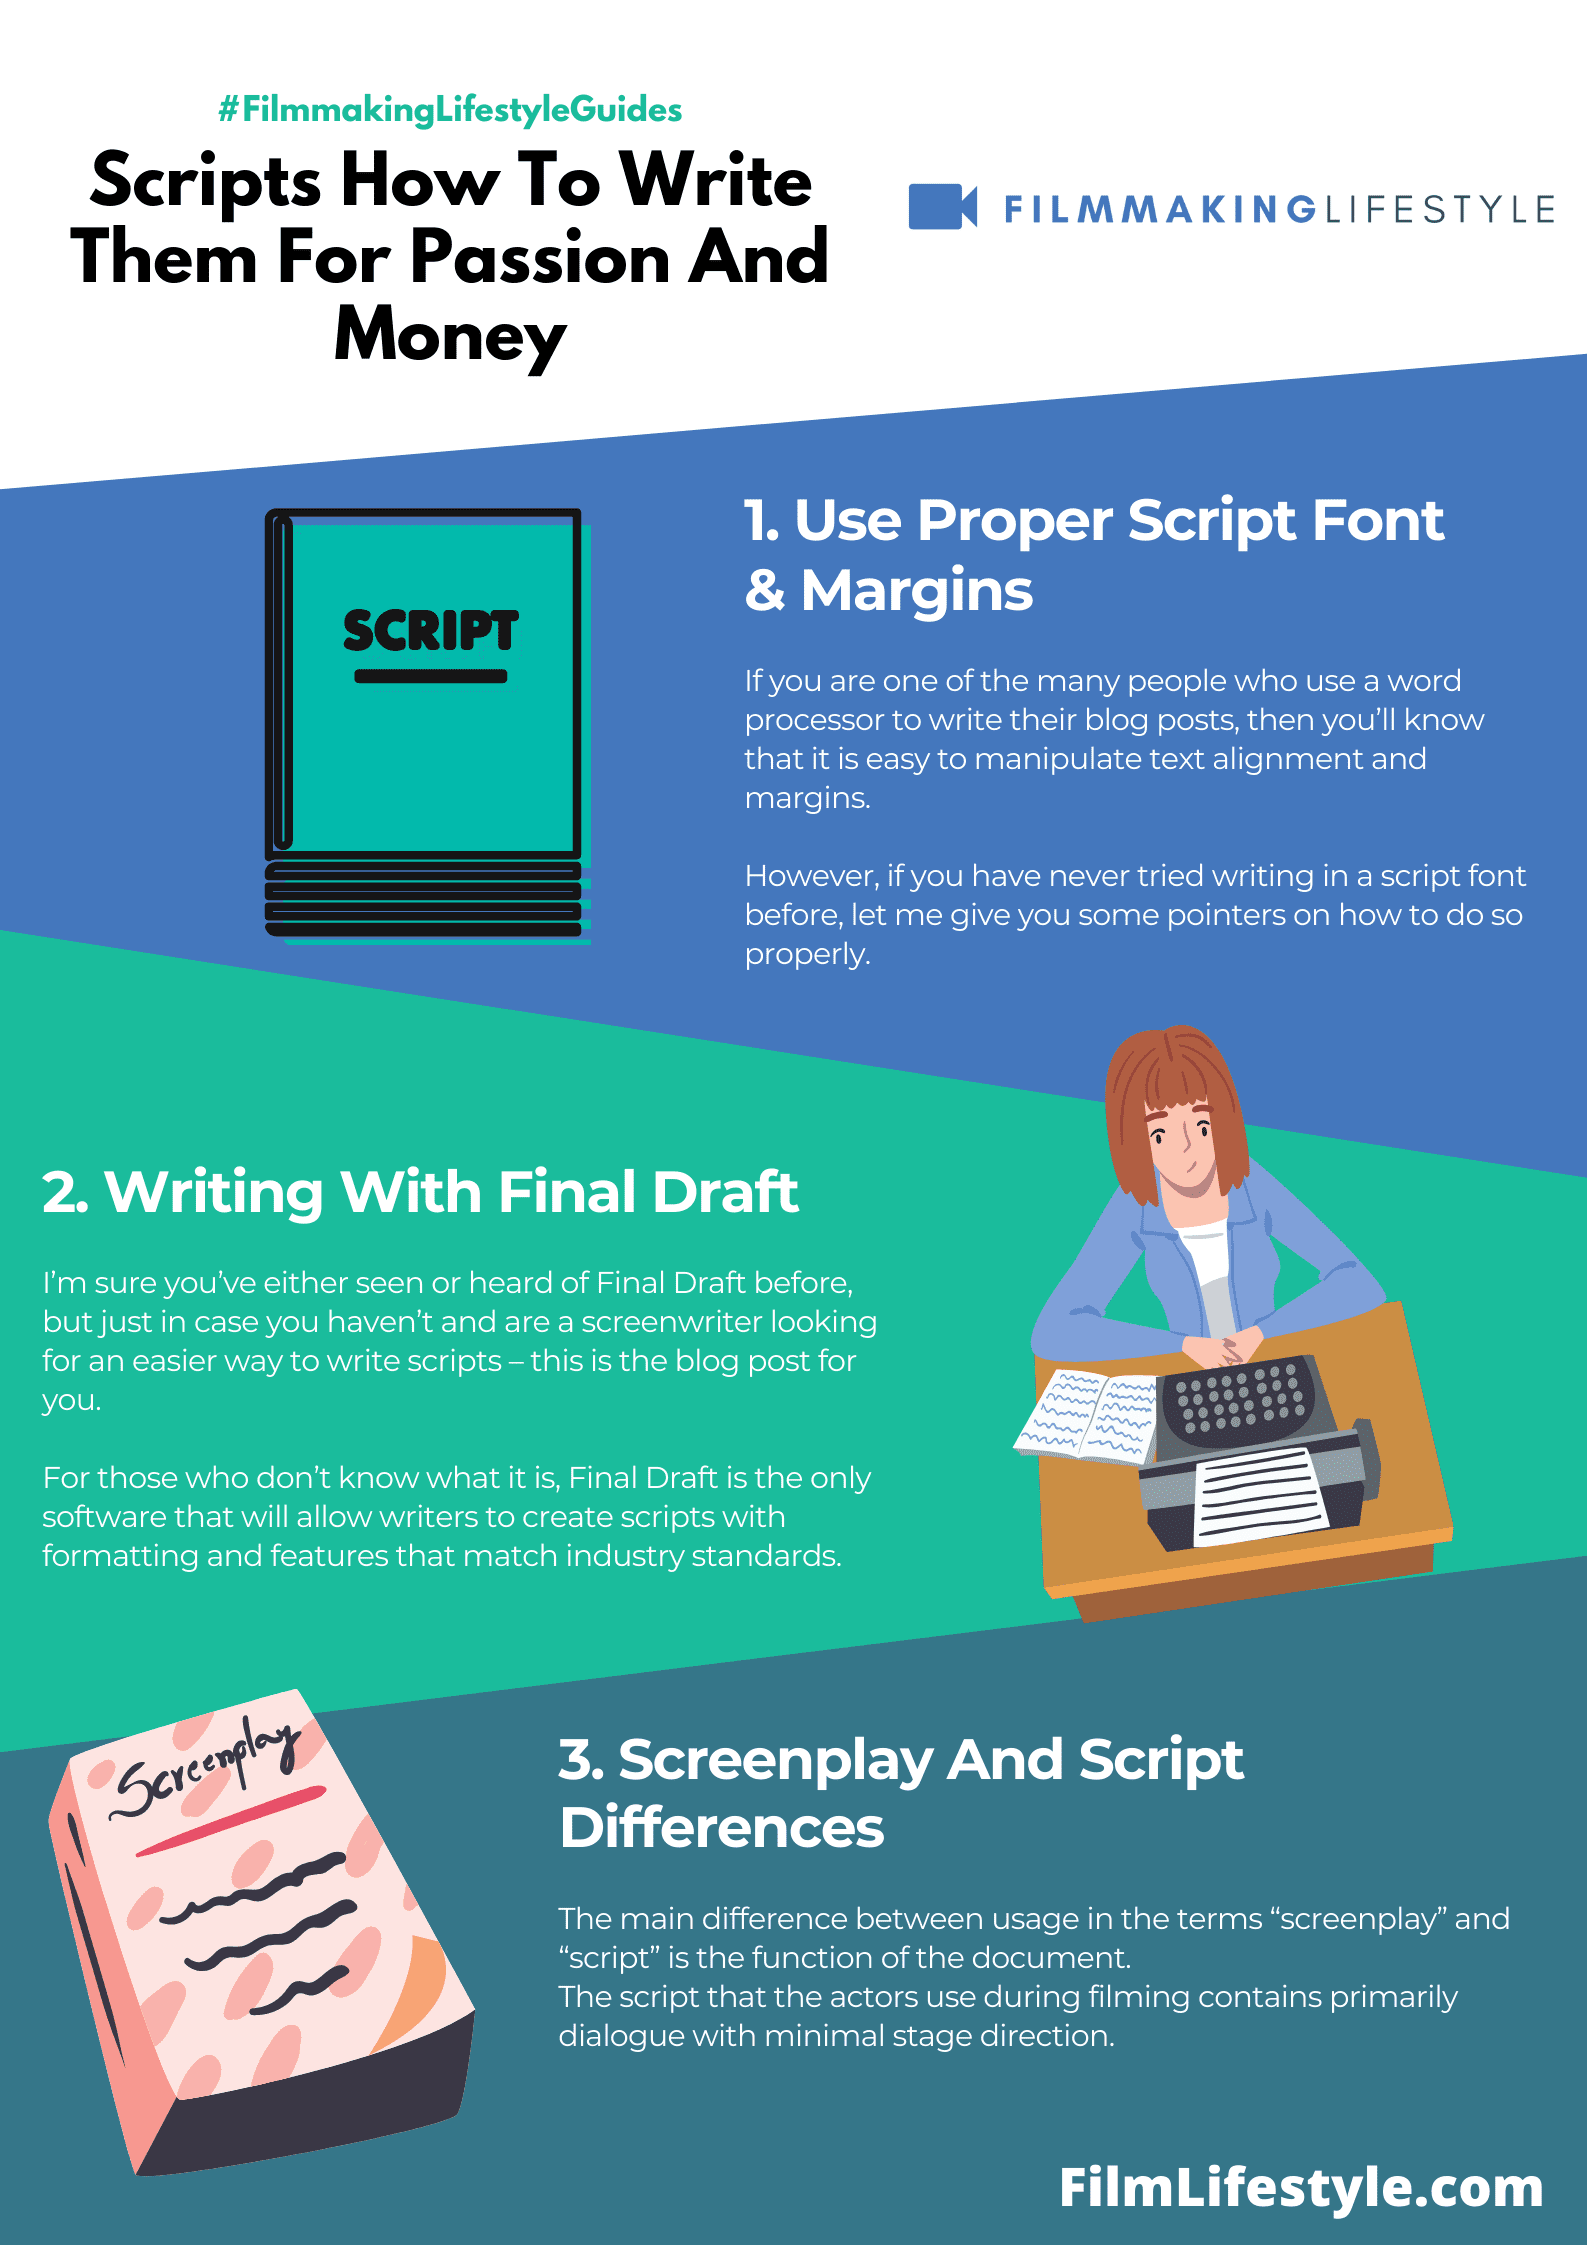 Scripts How To Write Them For Passion And Money